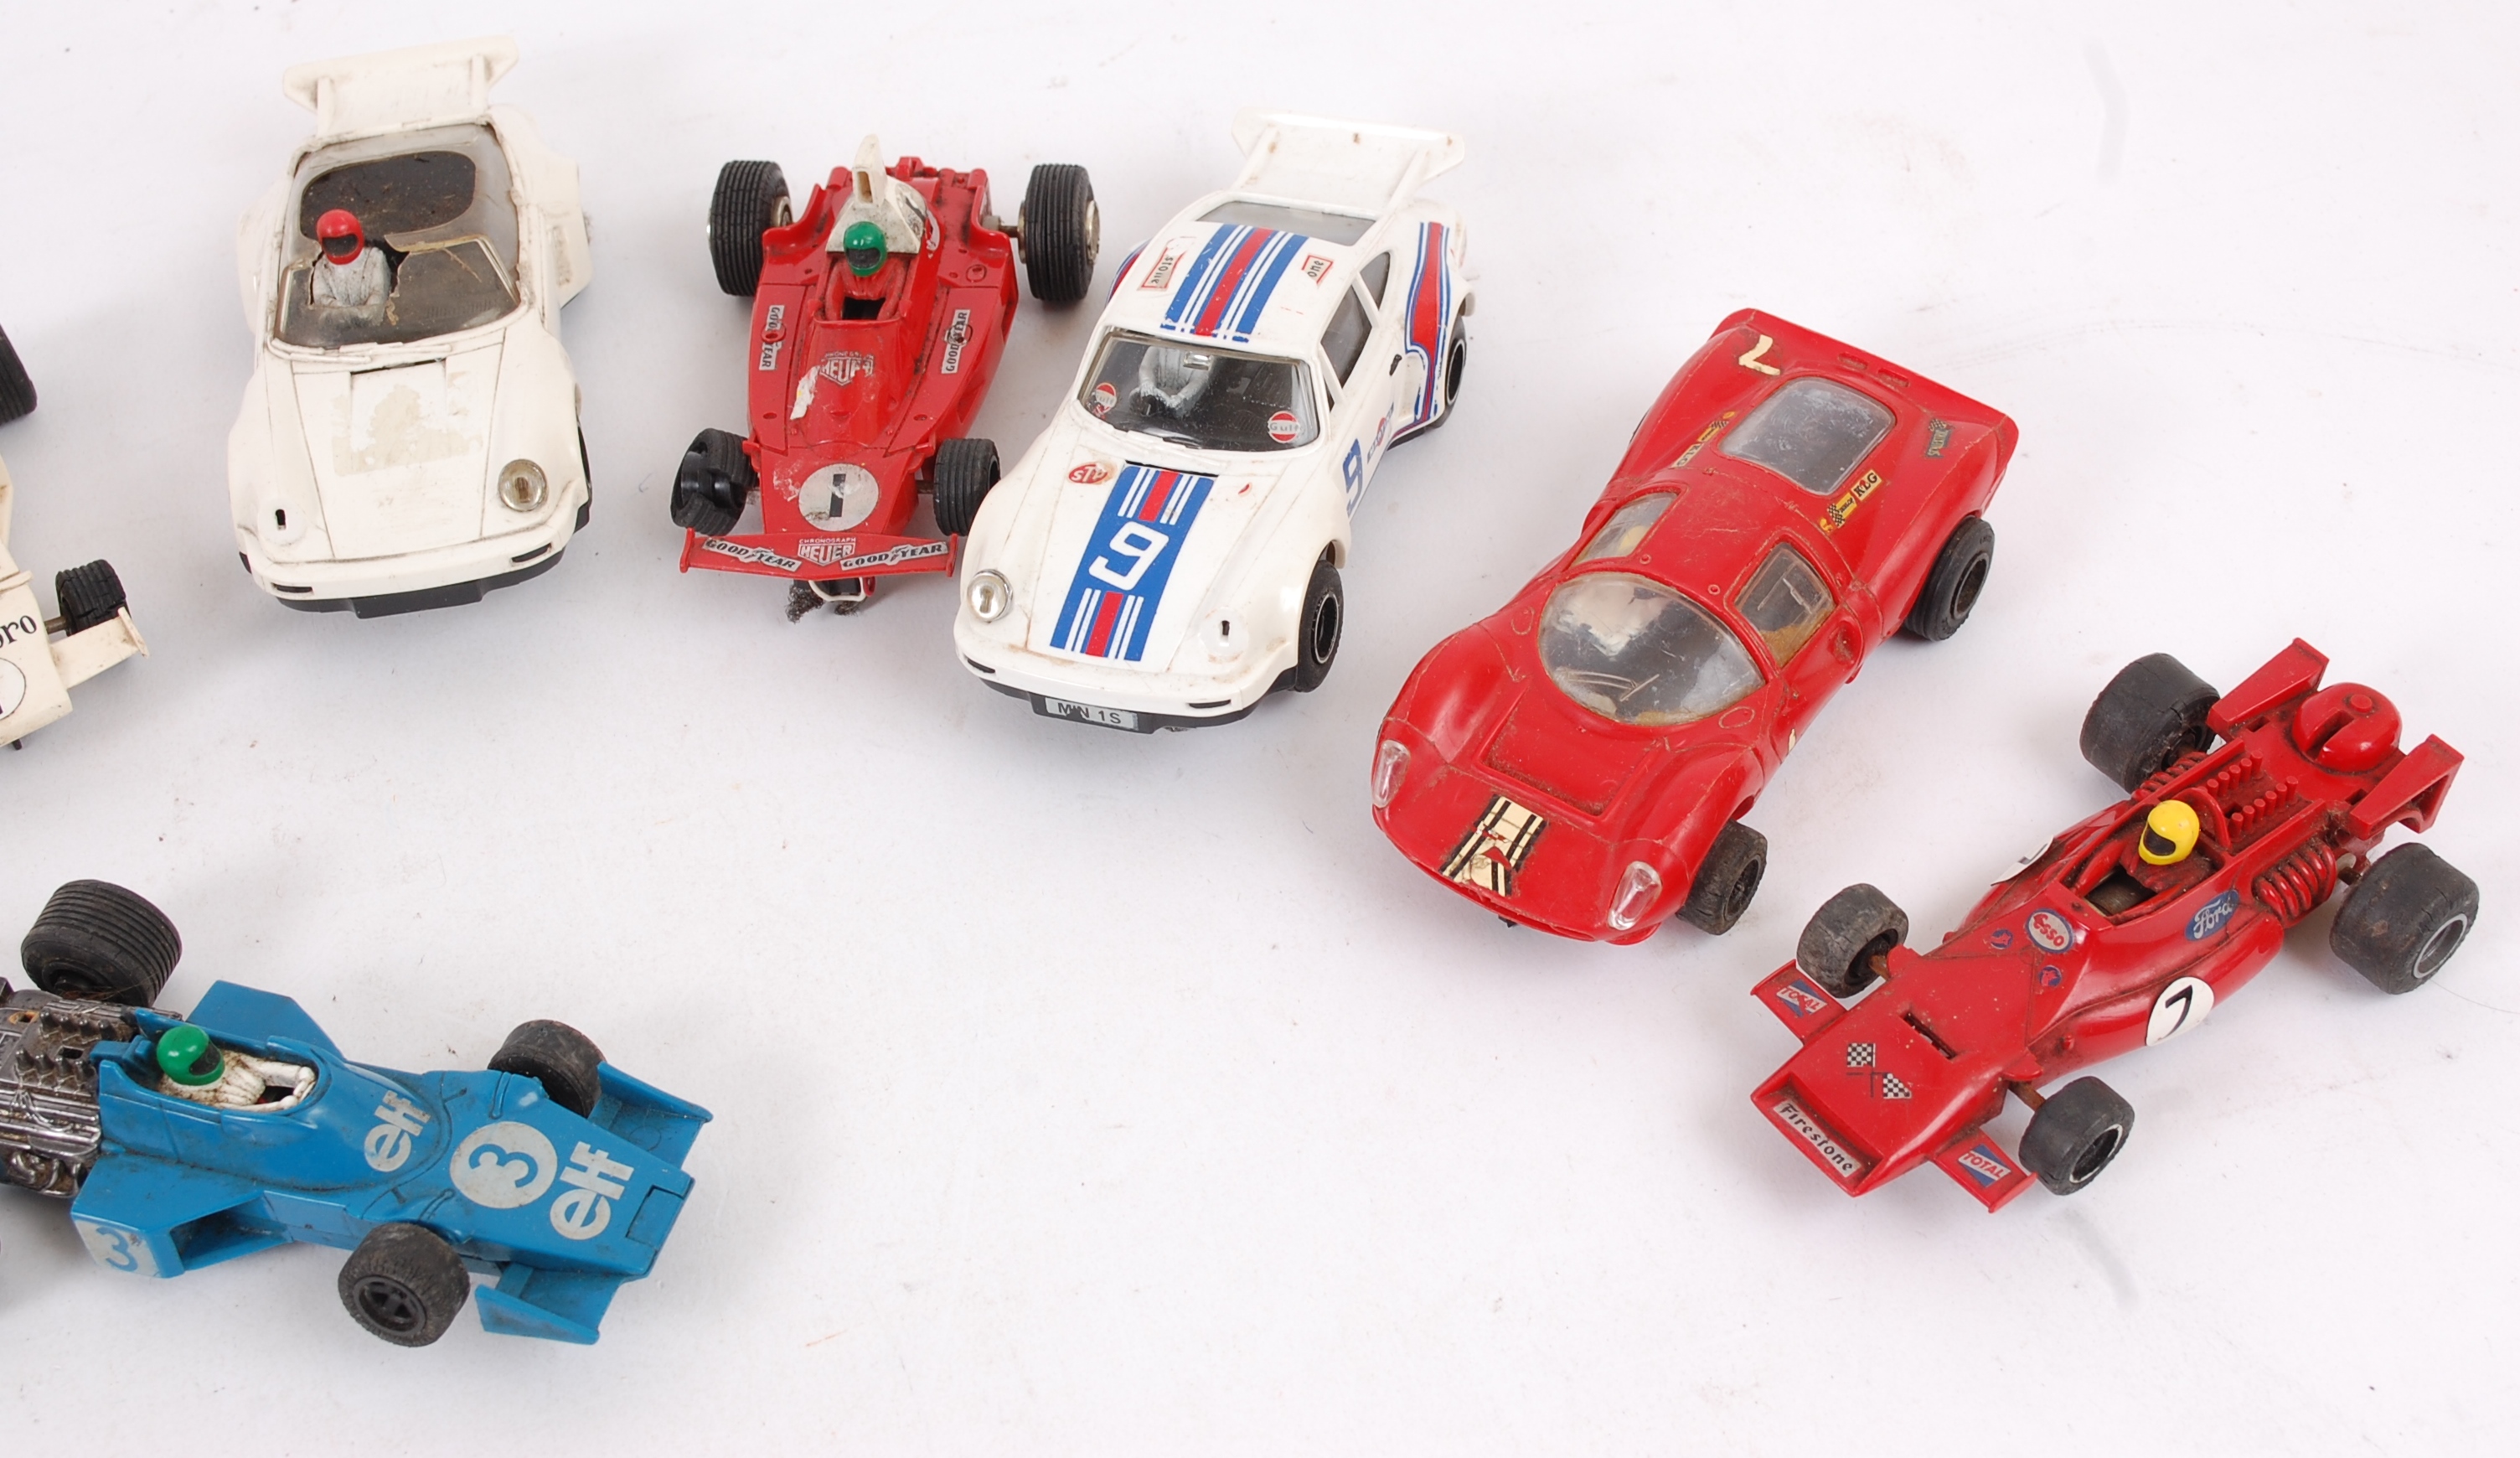 SCALEXTRIC; A collection of 10x assorted loose Scalextric racing cars. - Image 3 of 3